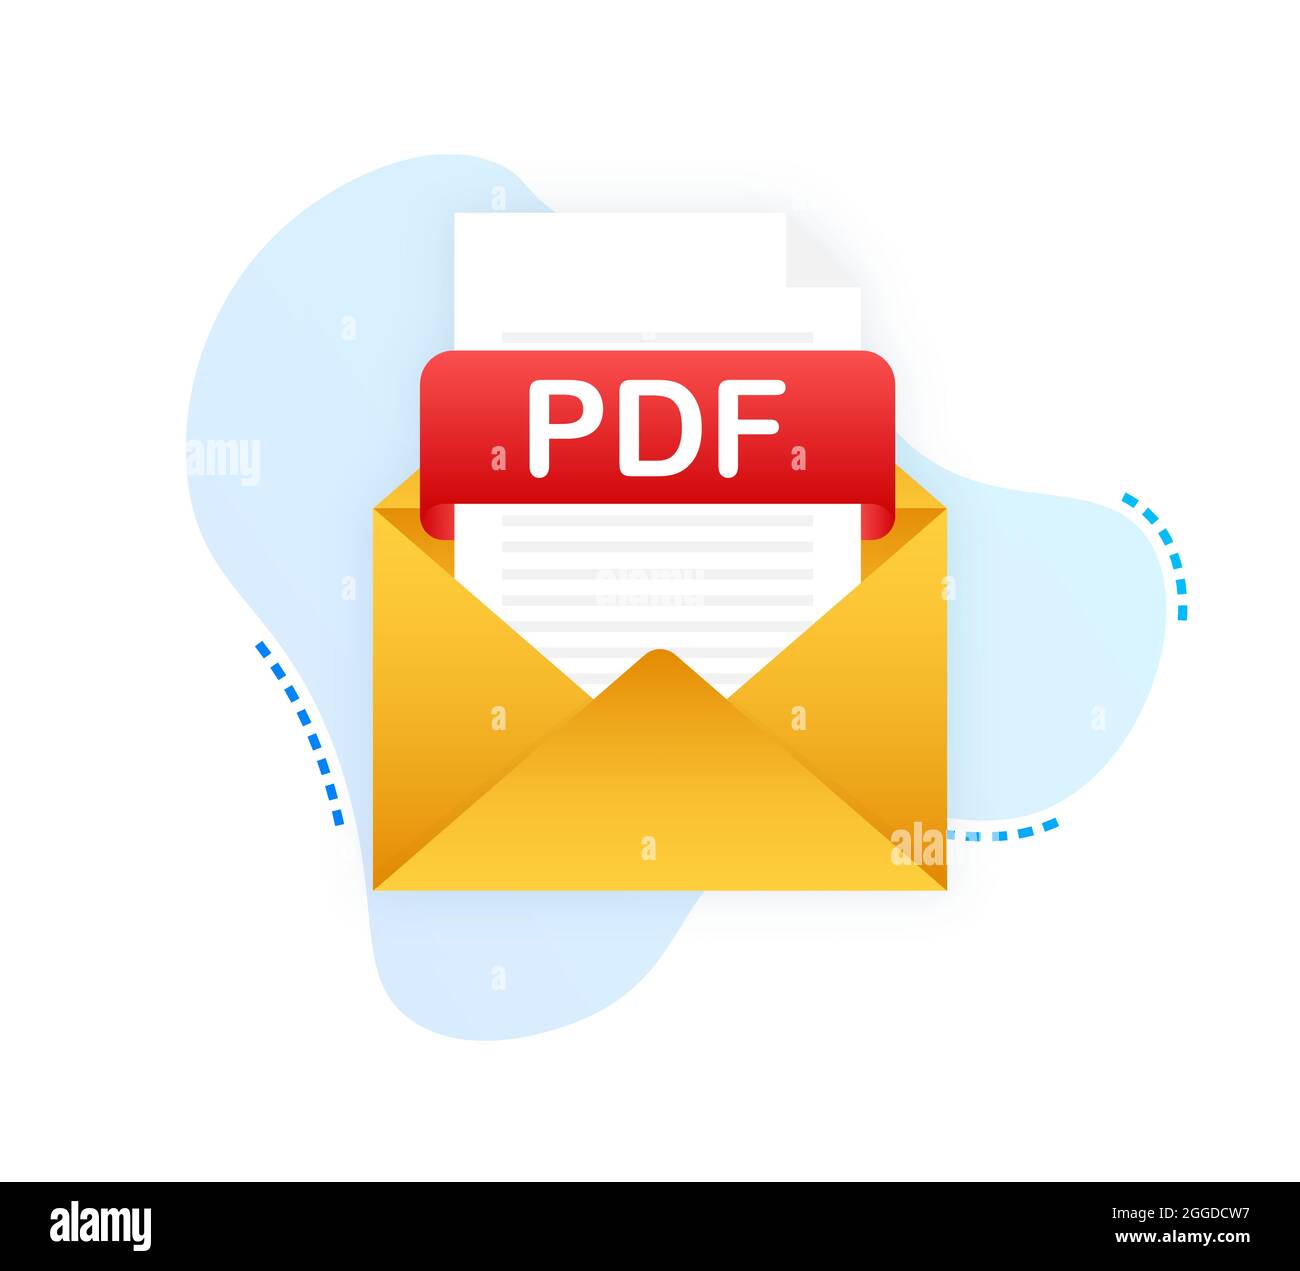 Download PDF button on laptop screen. Downloading document concept. File with PDF label and down arrow sign. Vector illustration Stock Vector